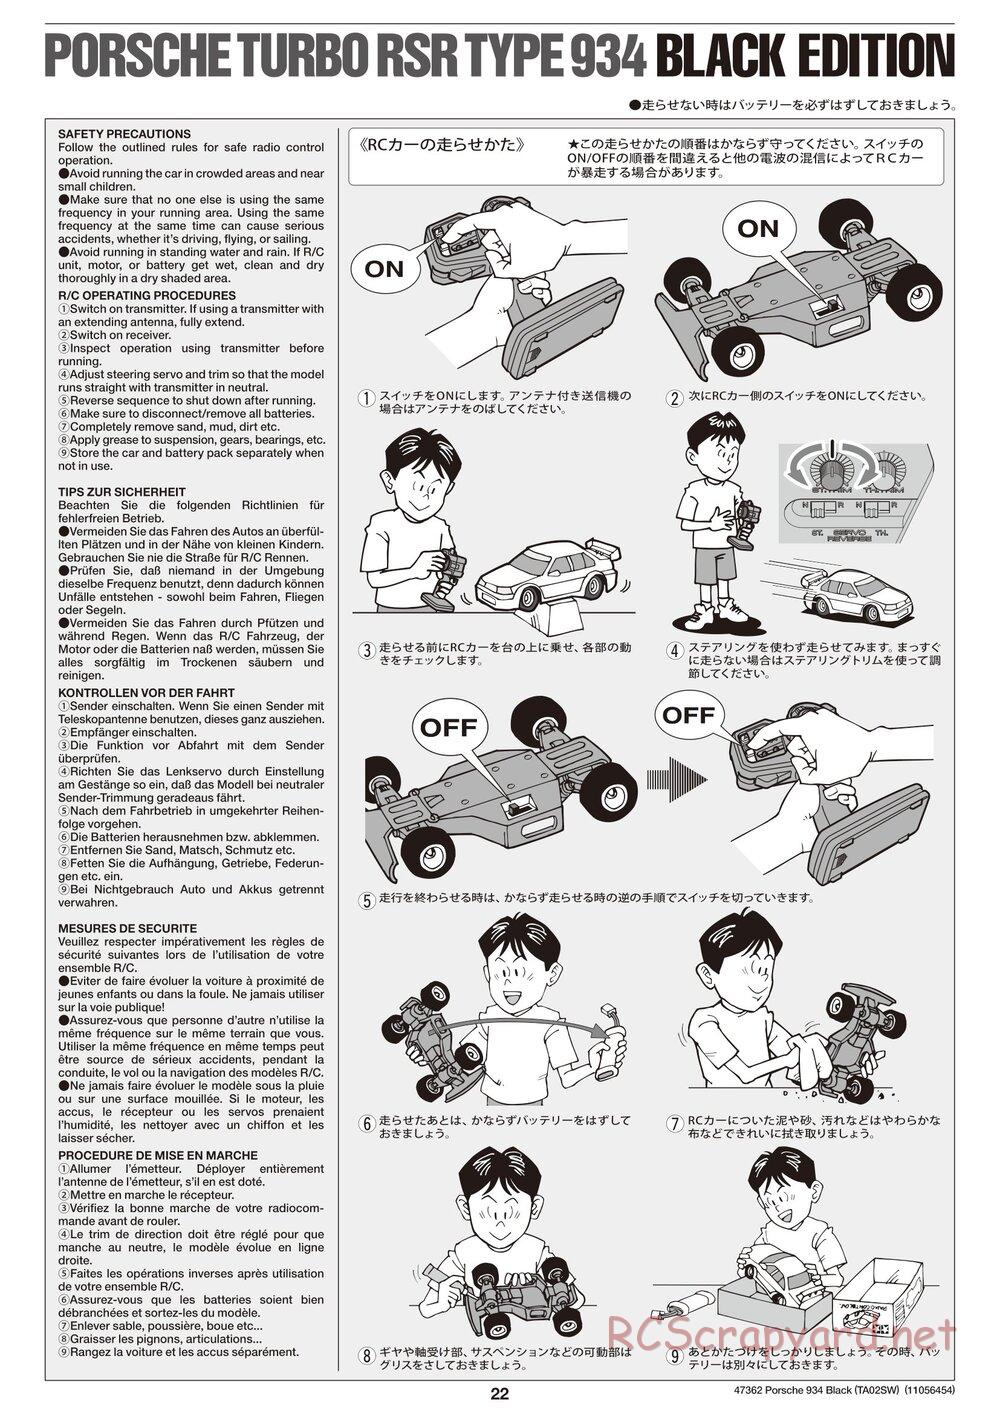 Tamiya - TT-02 White Special Chassis - Manual - Page 22